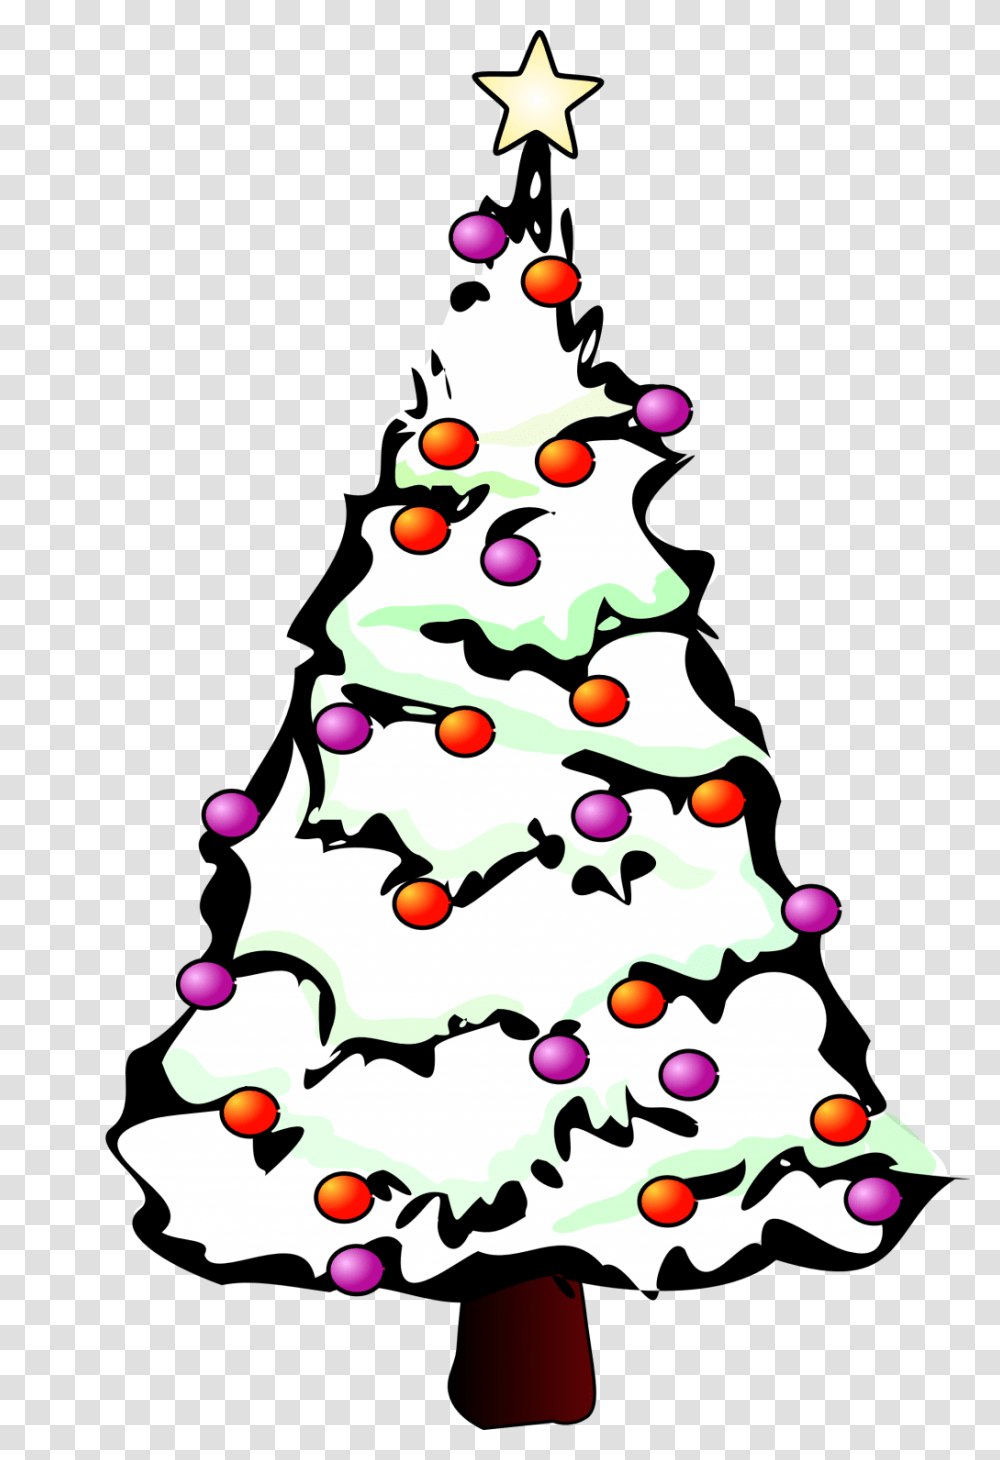 Baby Nursery Entrancing Snowy Christmas Tree Black And White, Plant, Ornament, Star Symbol Transparent Png